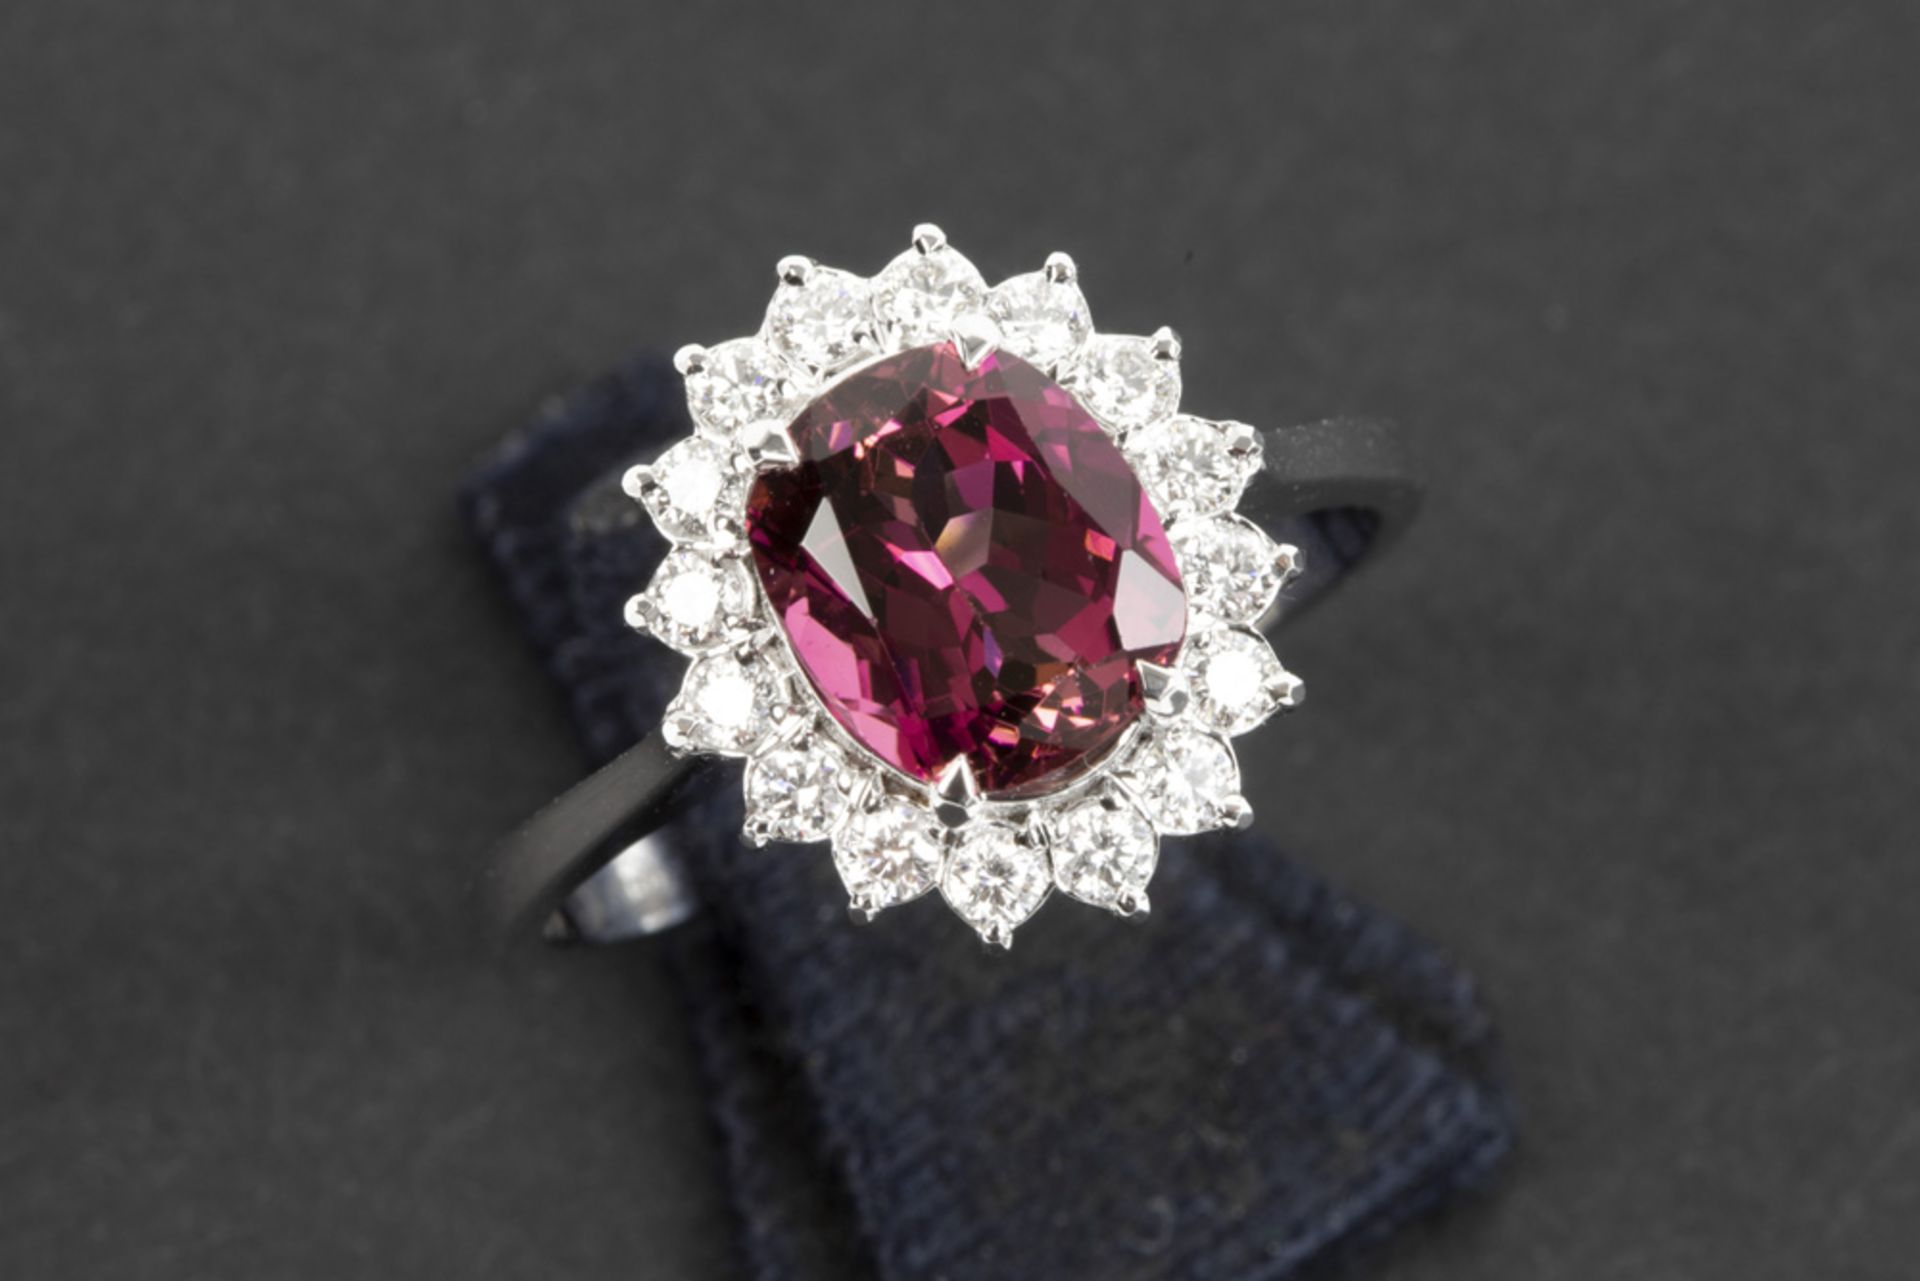 ring in white gold (18 carat) with a 1,86 carat tourmaline with nice natural pink color surrounded